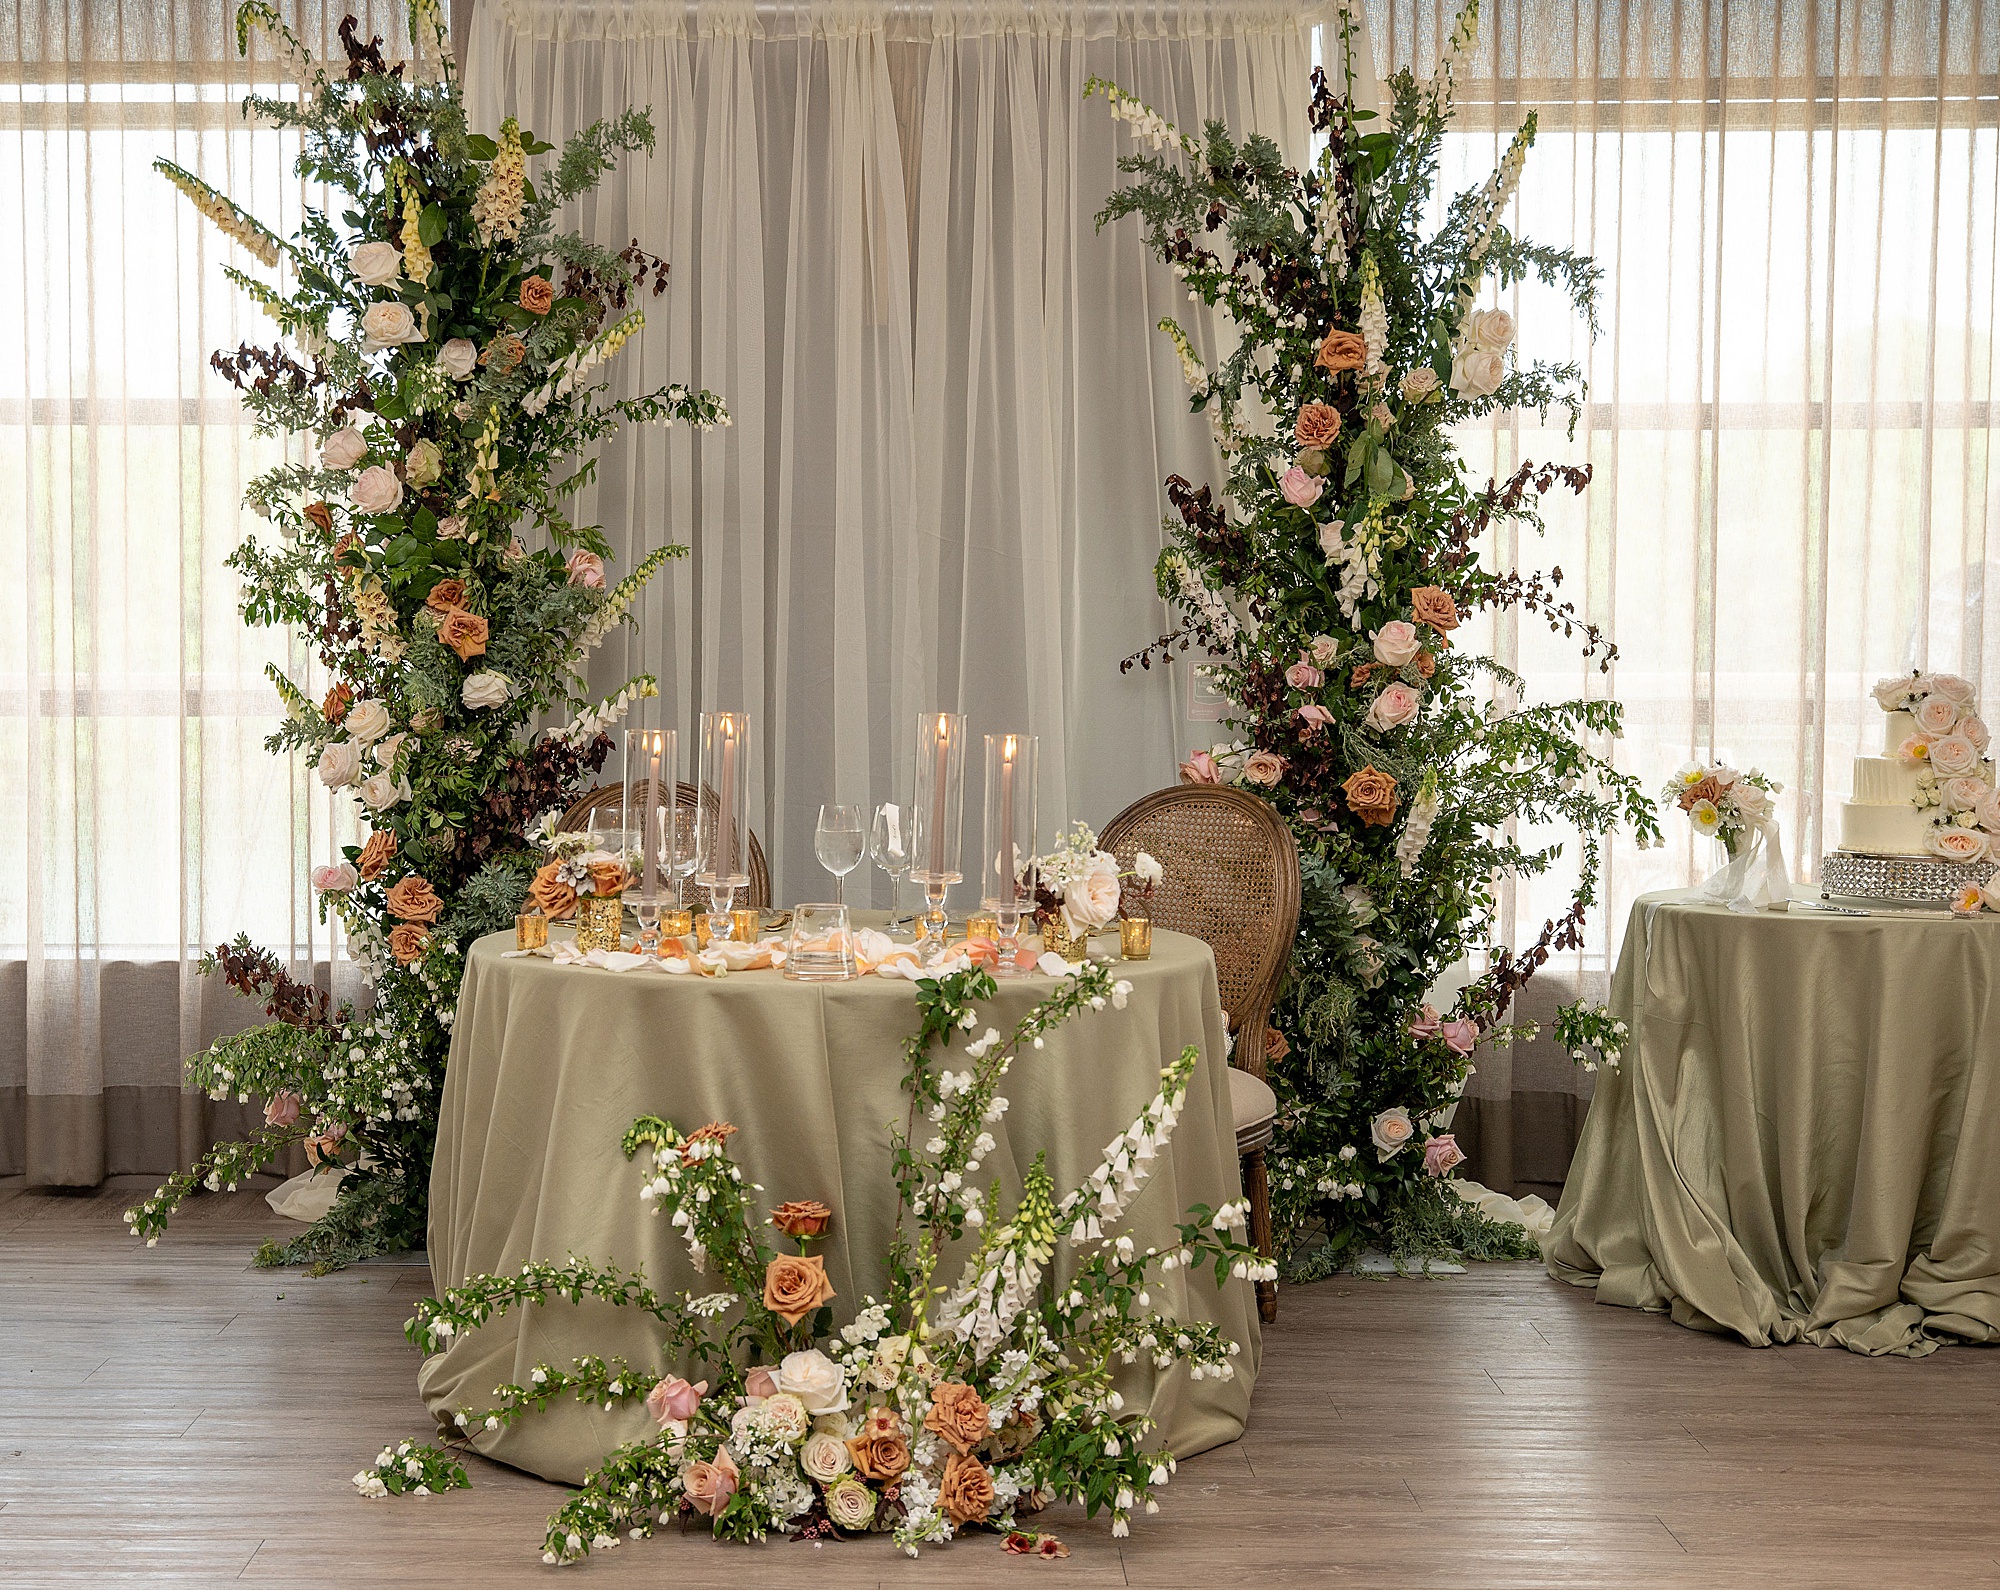 sweetheart table with floral display during elegant Baltimore microwedding